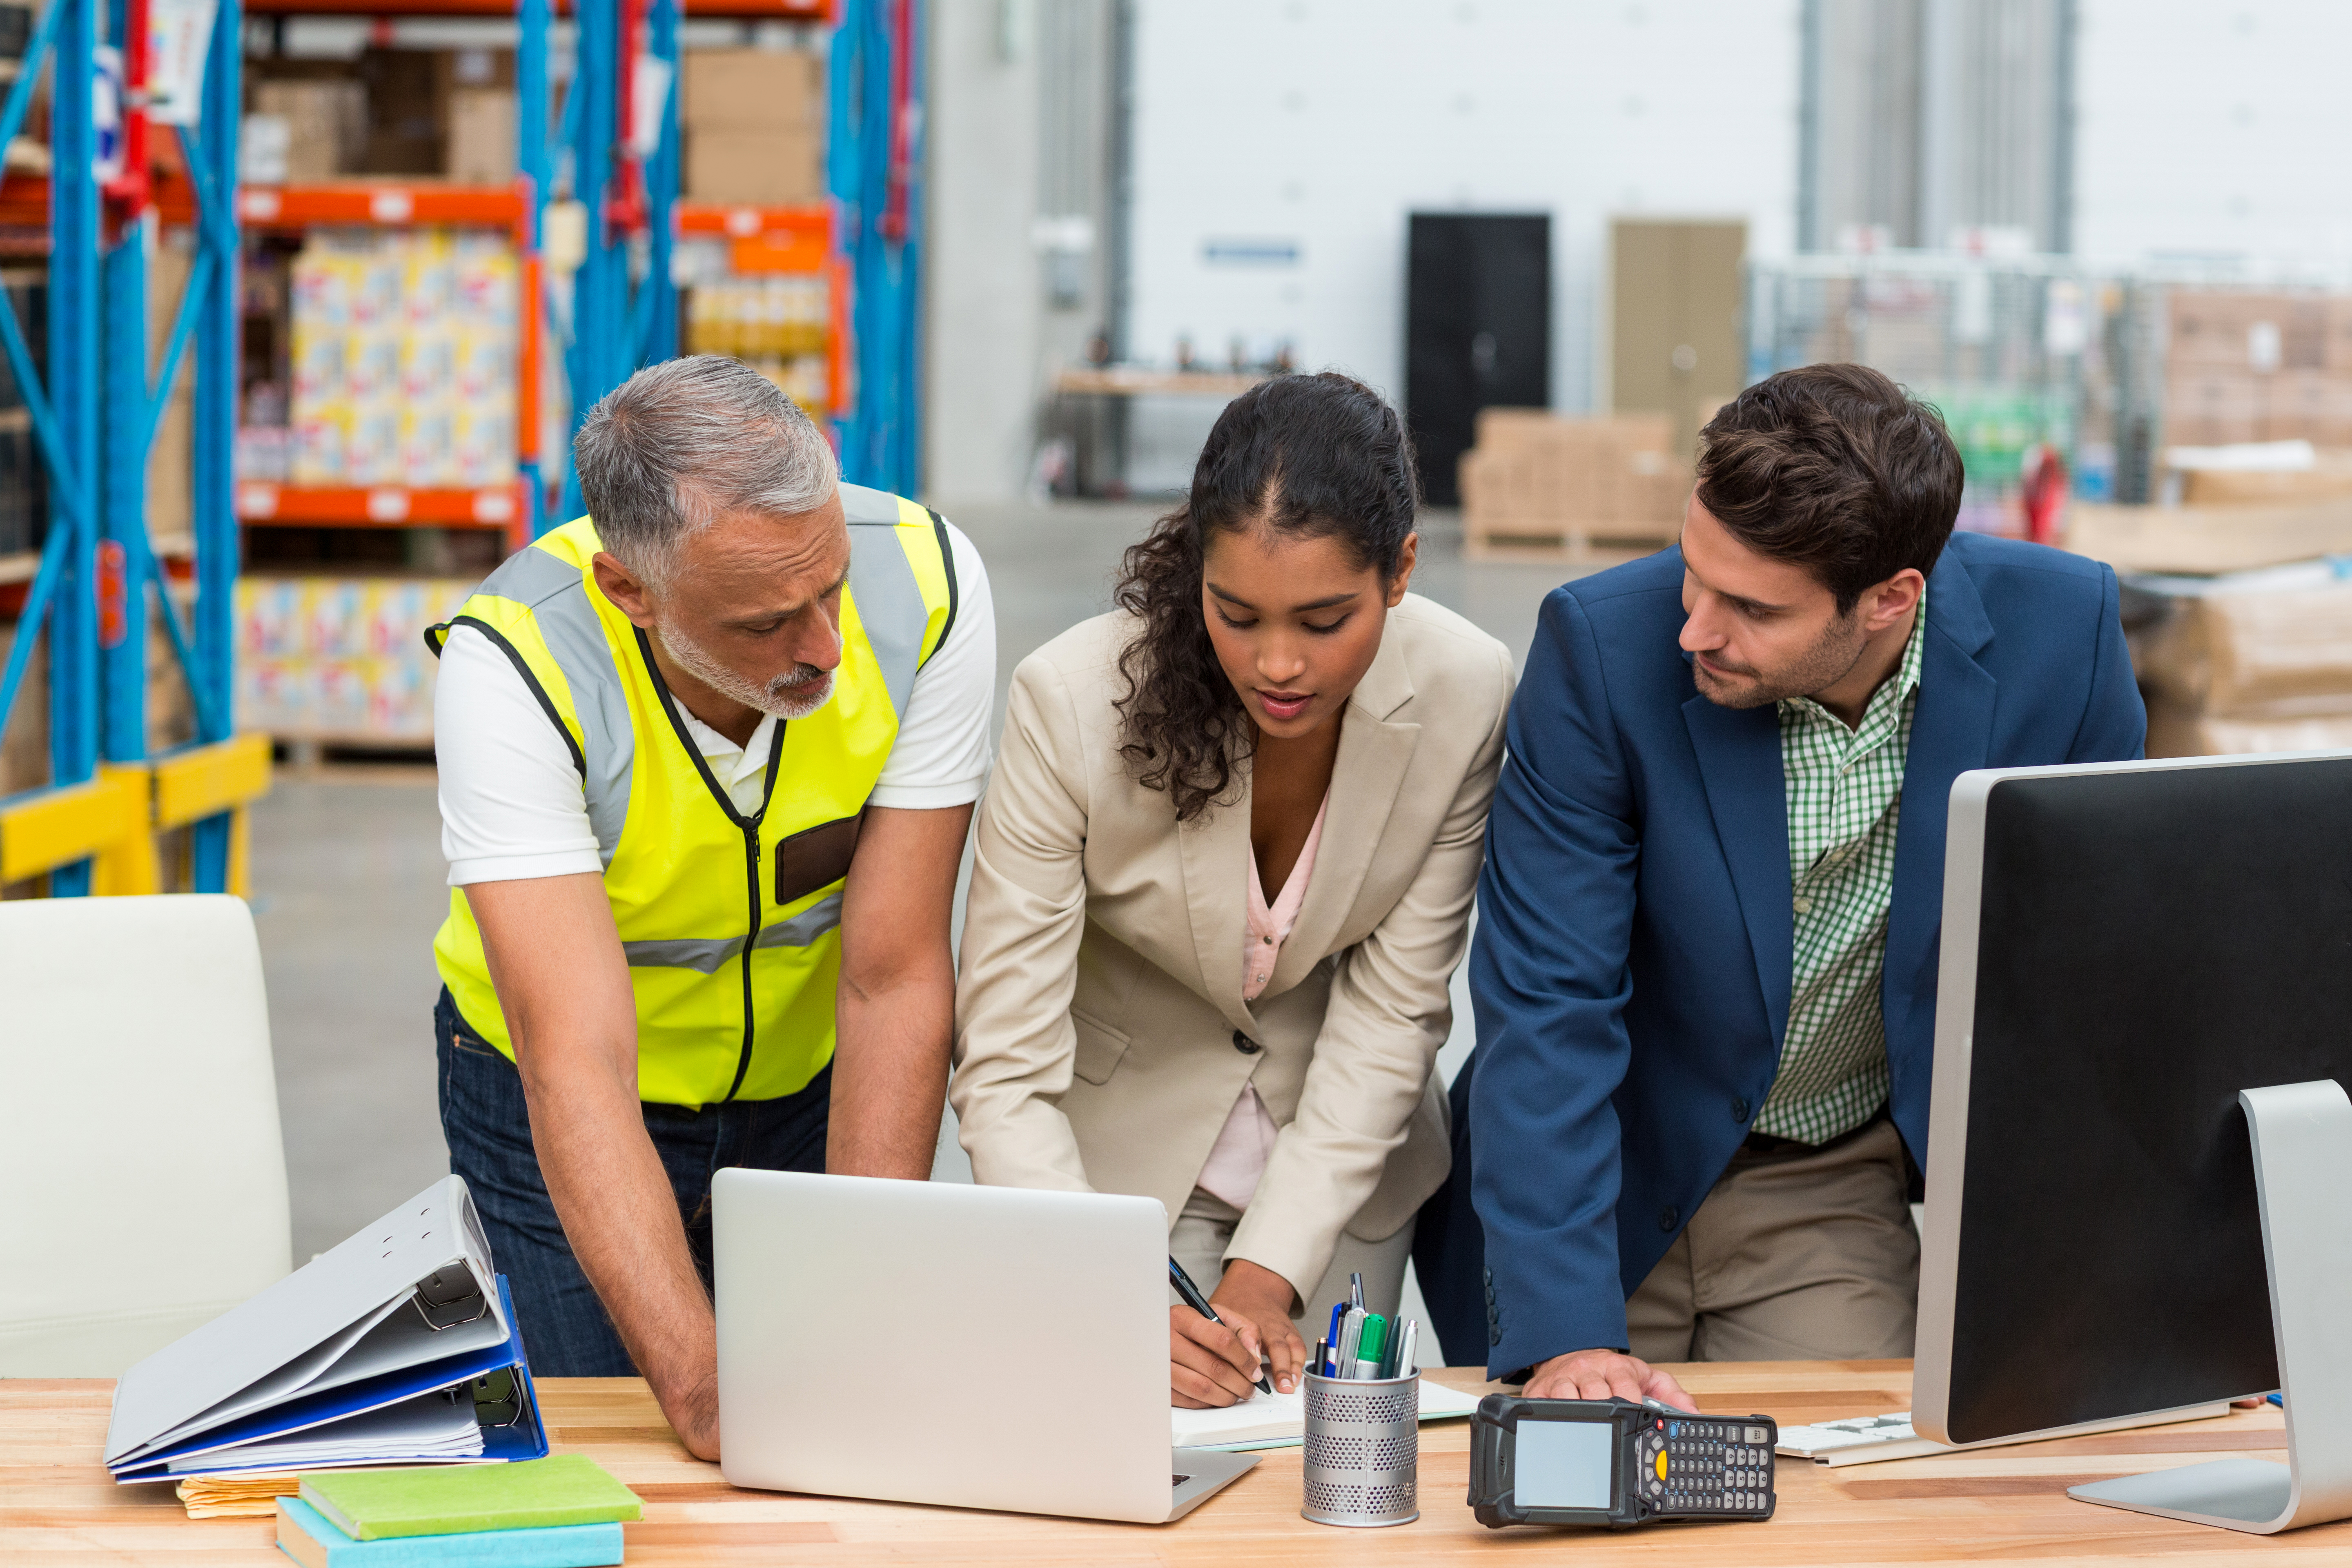 Three workers gathered around a laptop in a warehouse